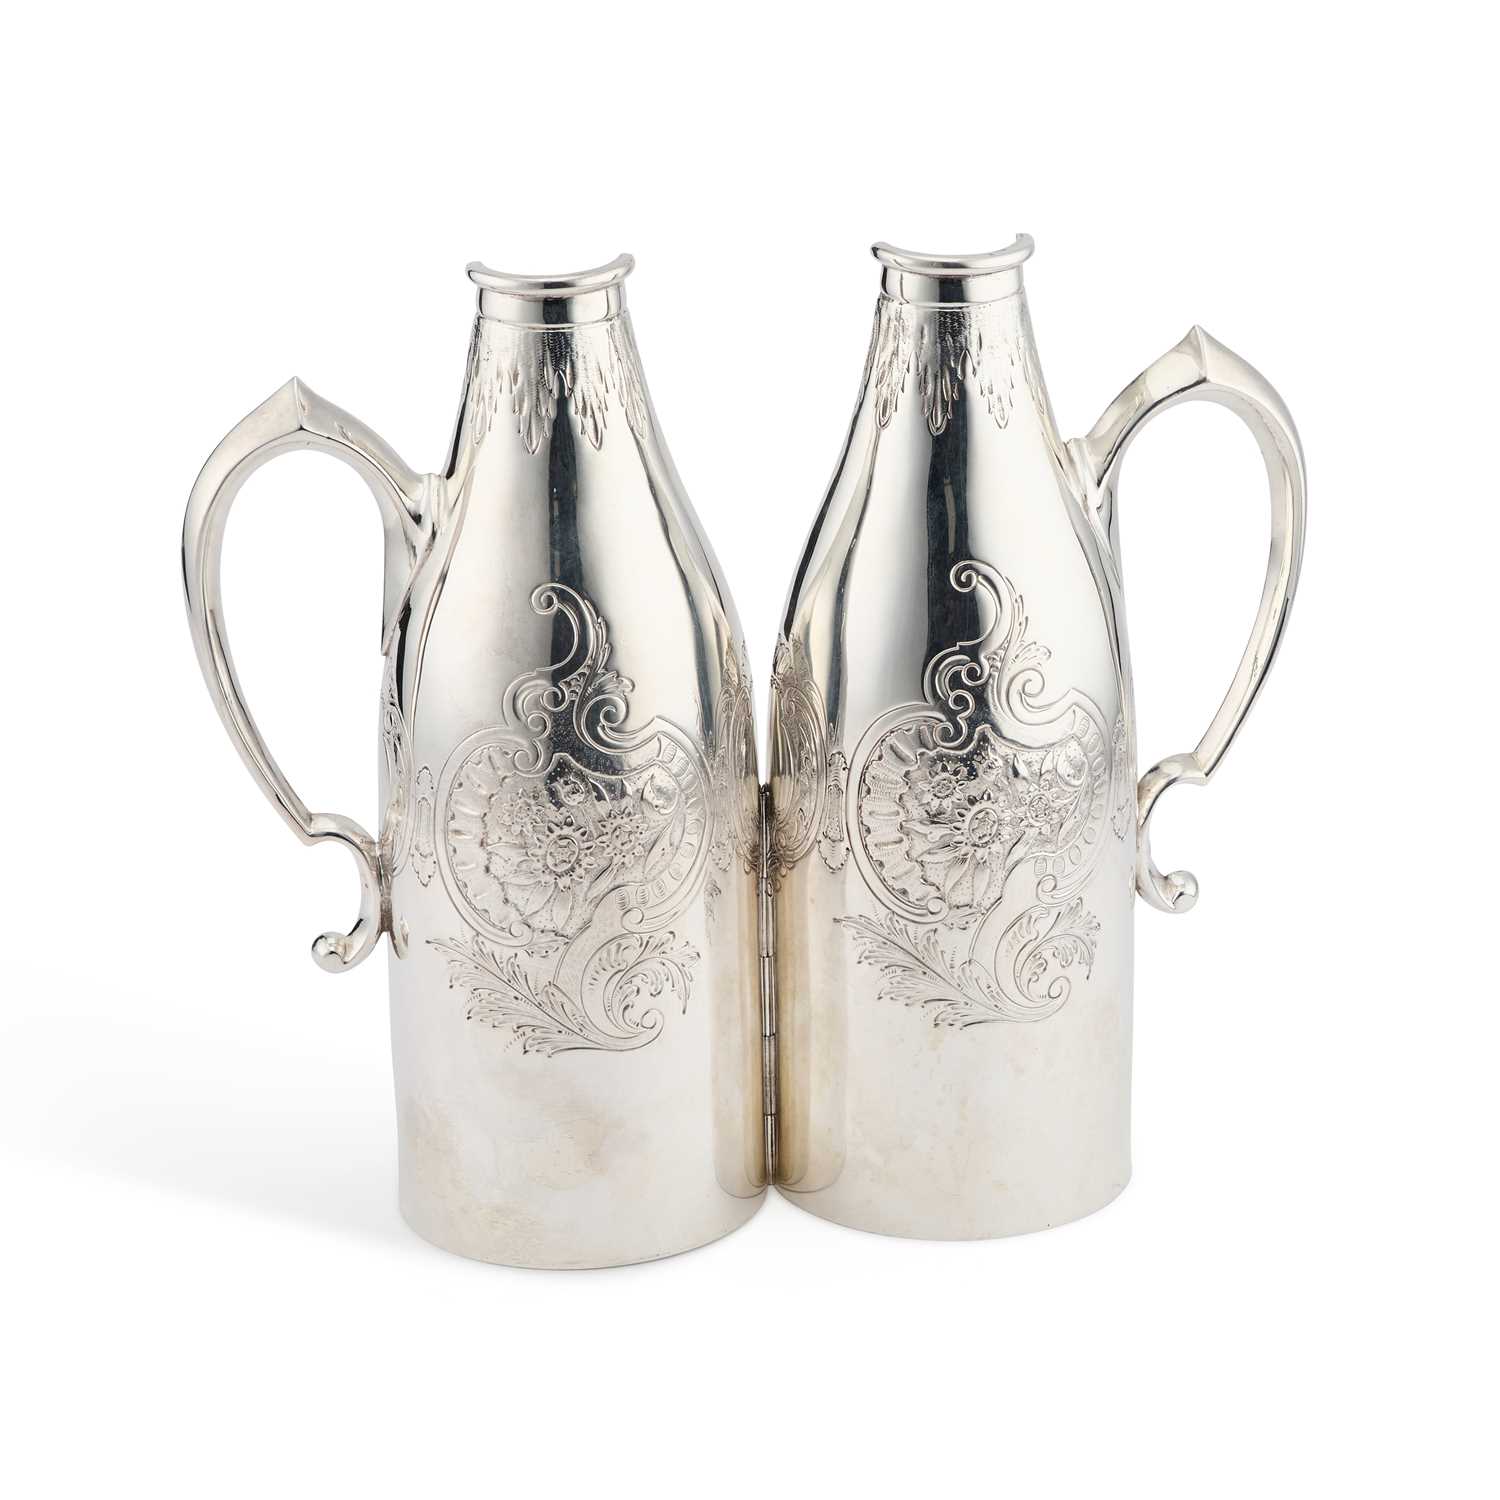 A LATE 19TH CENTURY SILVER-PLATED BOTTLE HOLDER